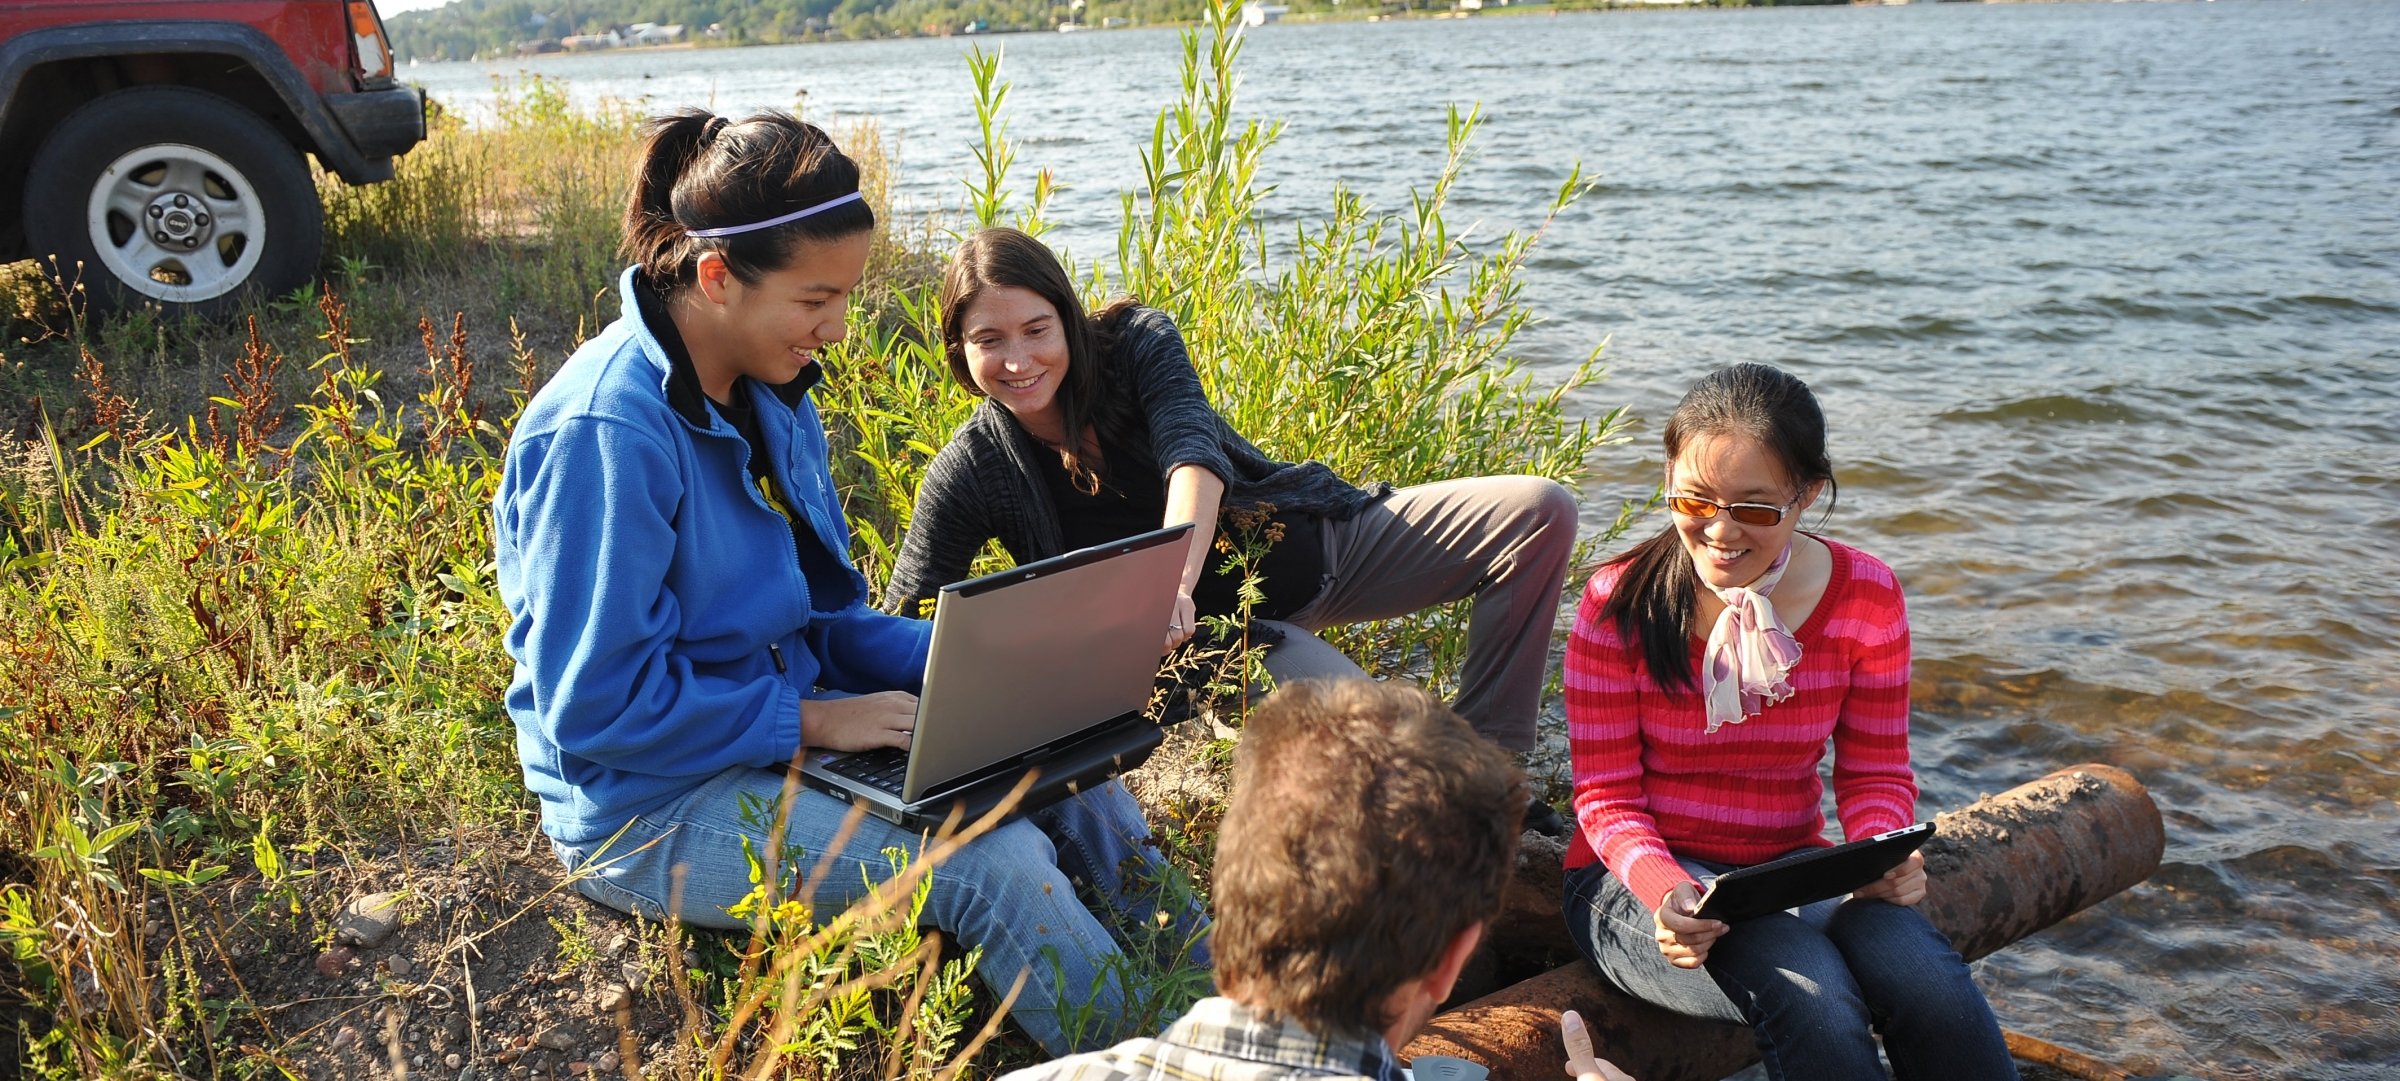 Students and professor conducting research on the lakeshore. One student is holding a laptop while the professor points out information on it.